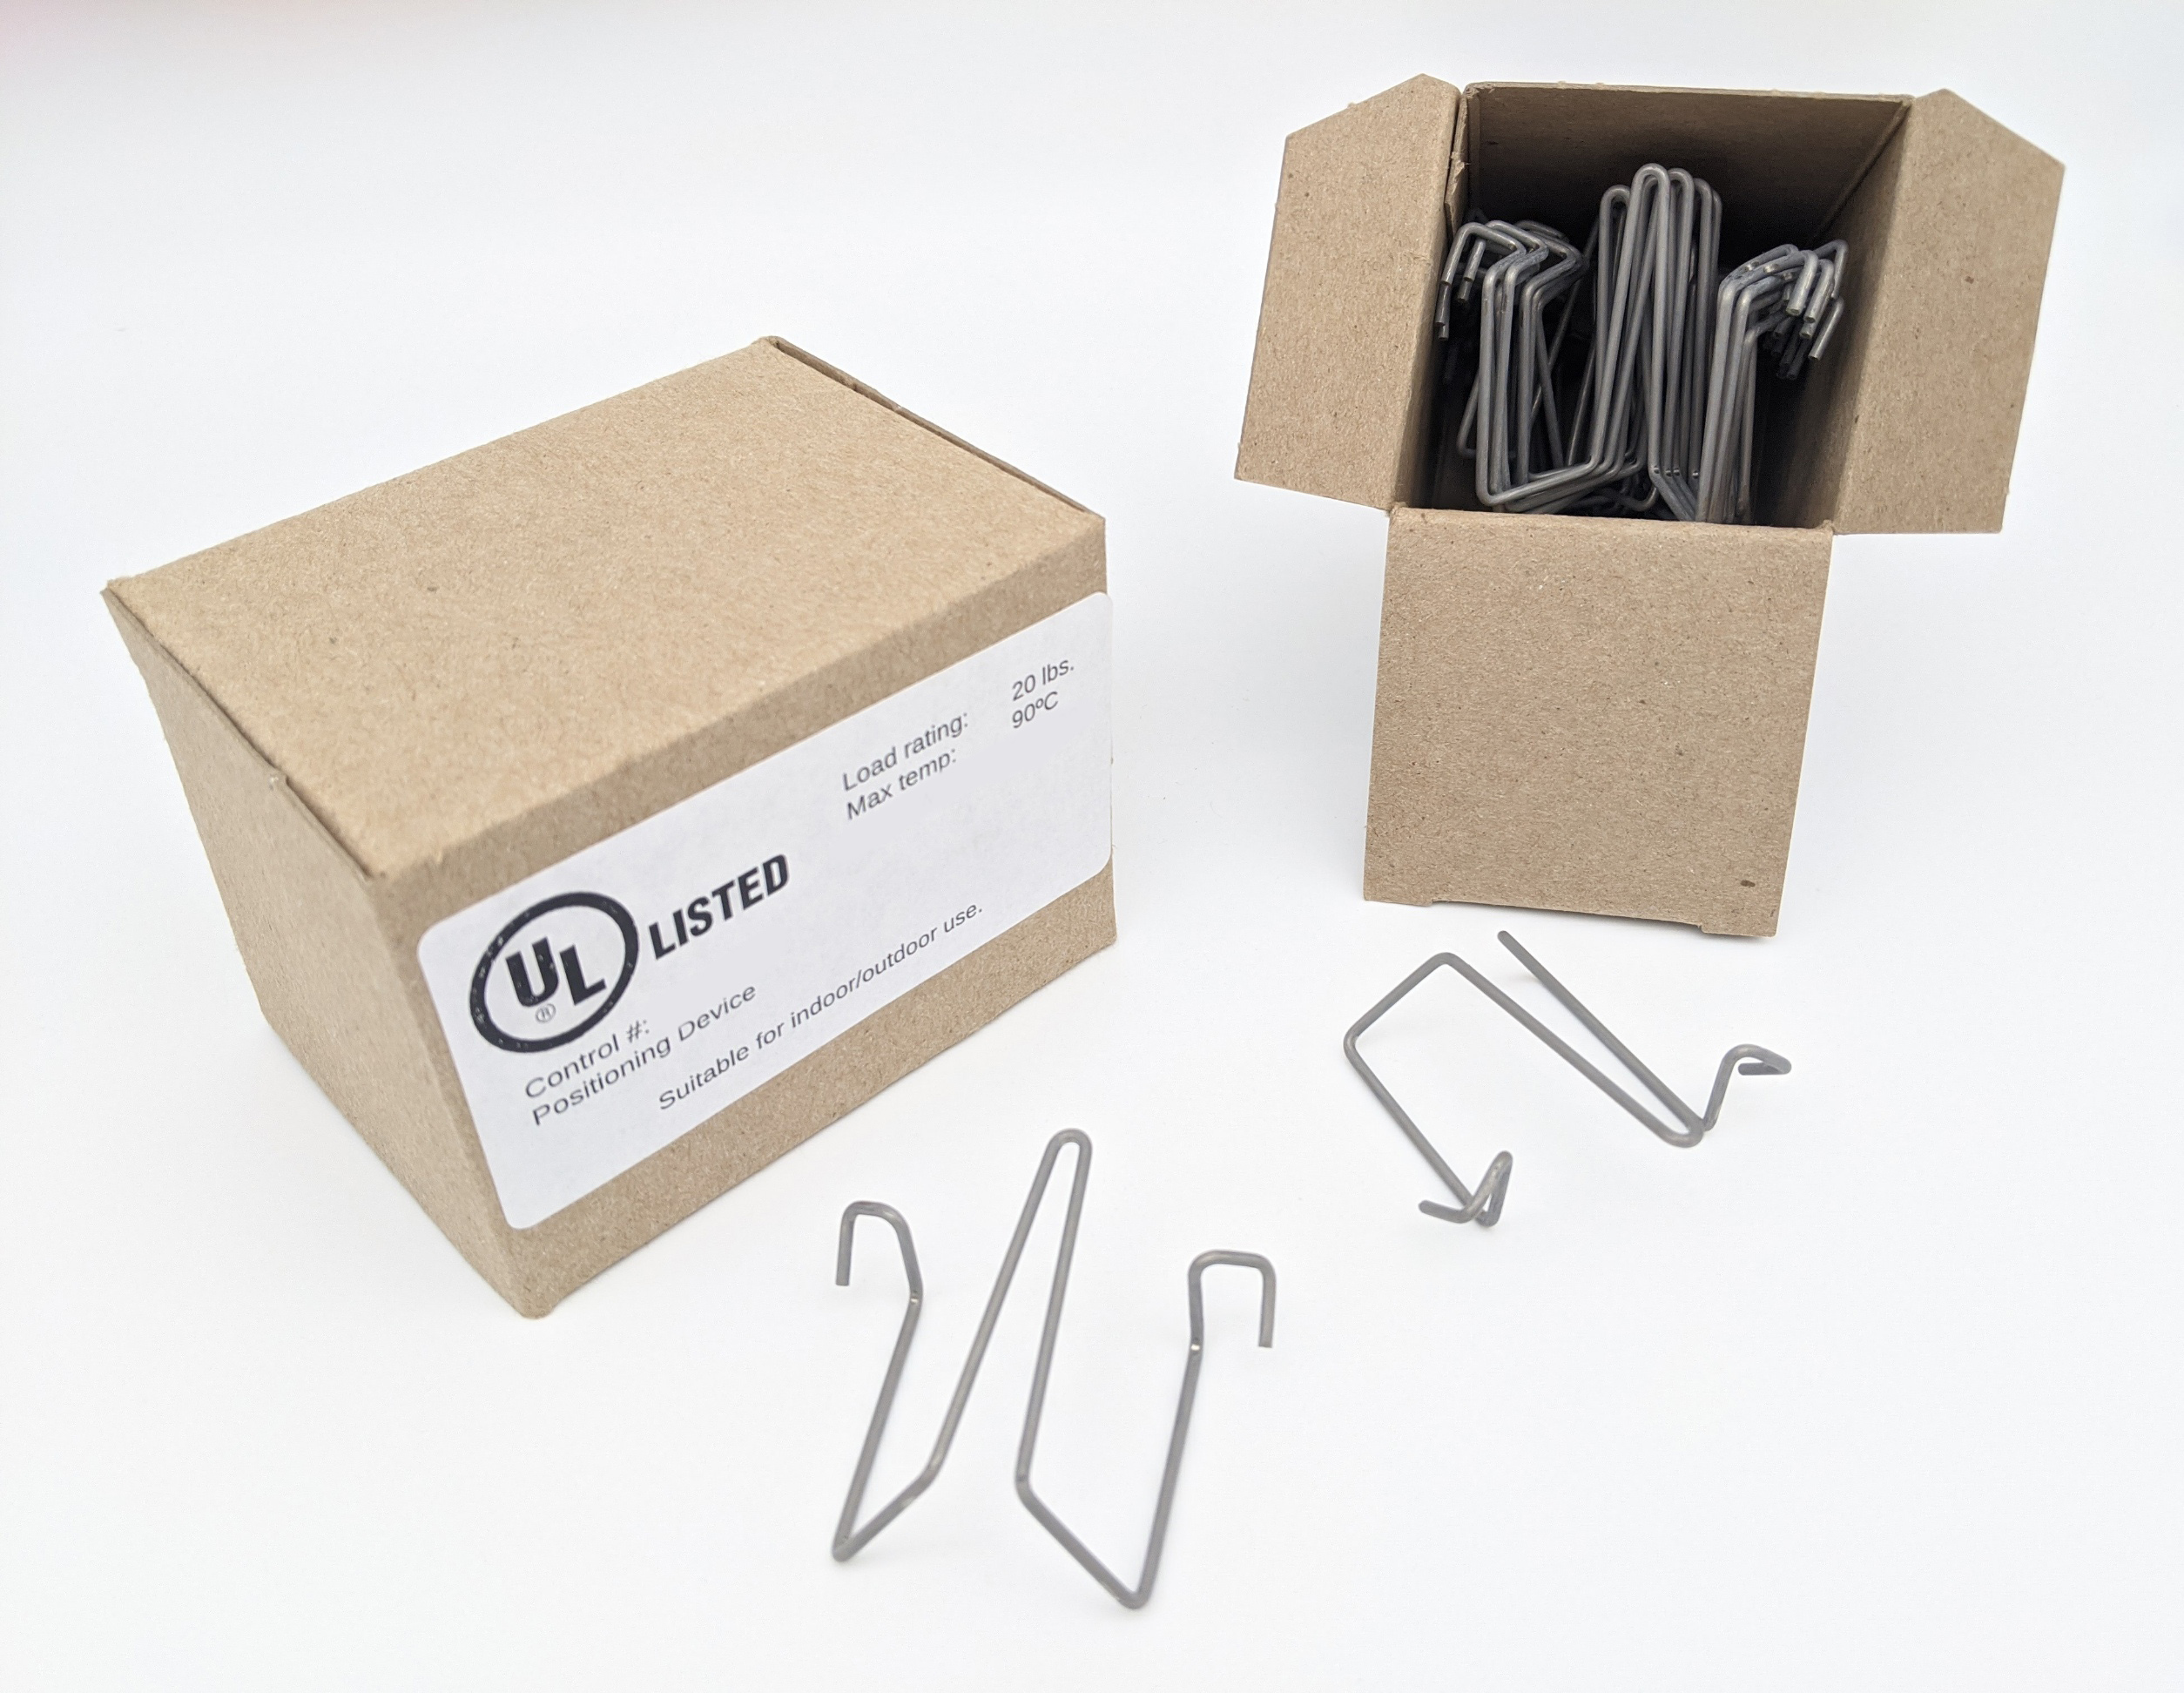 200 Pieces/Set 20 Models Spring Set Carbon Steel Compression Extension Spring Classification Kit Spring Parts with Plastic Box 